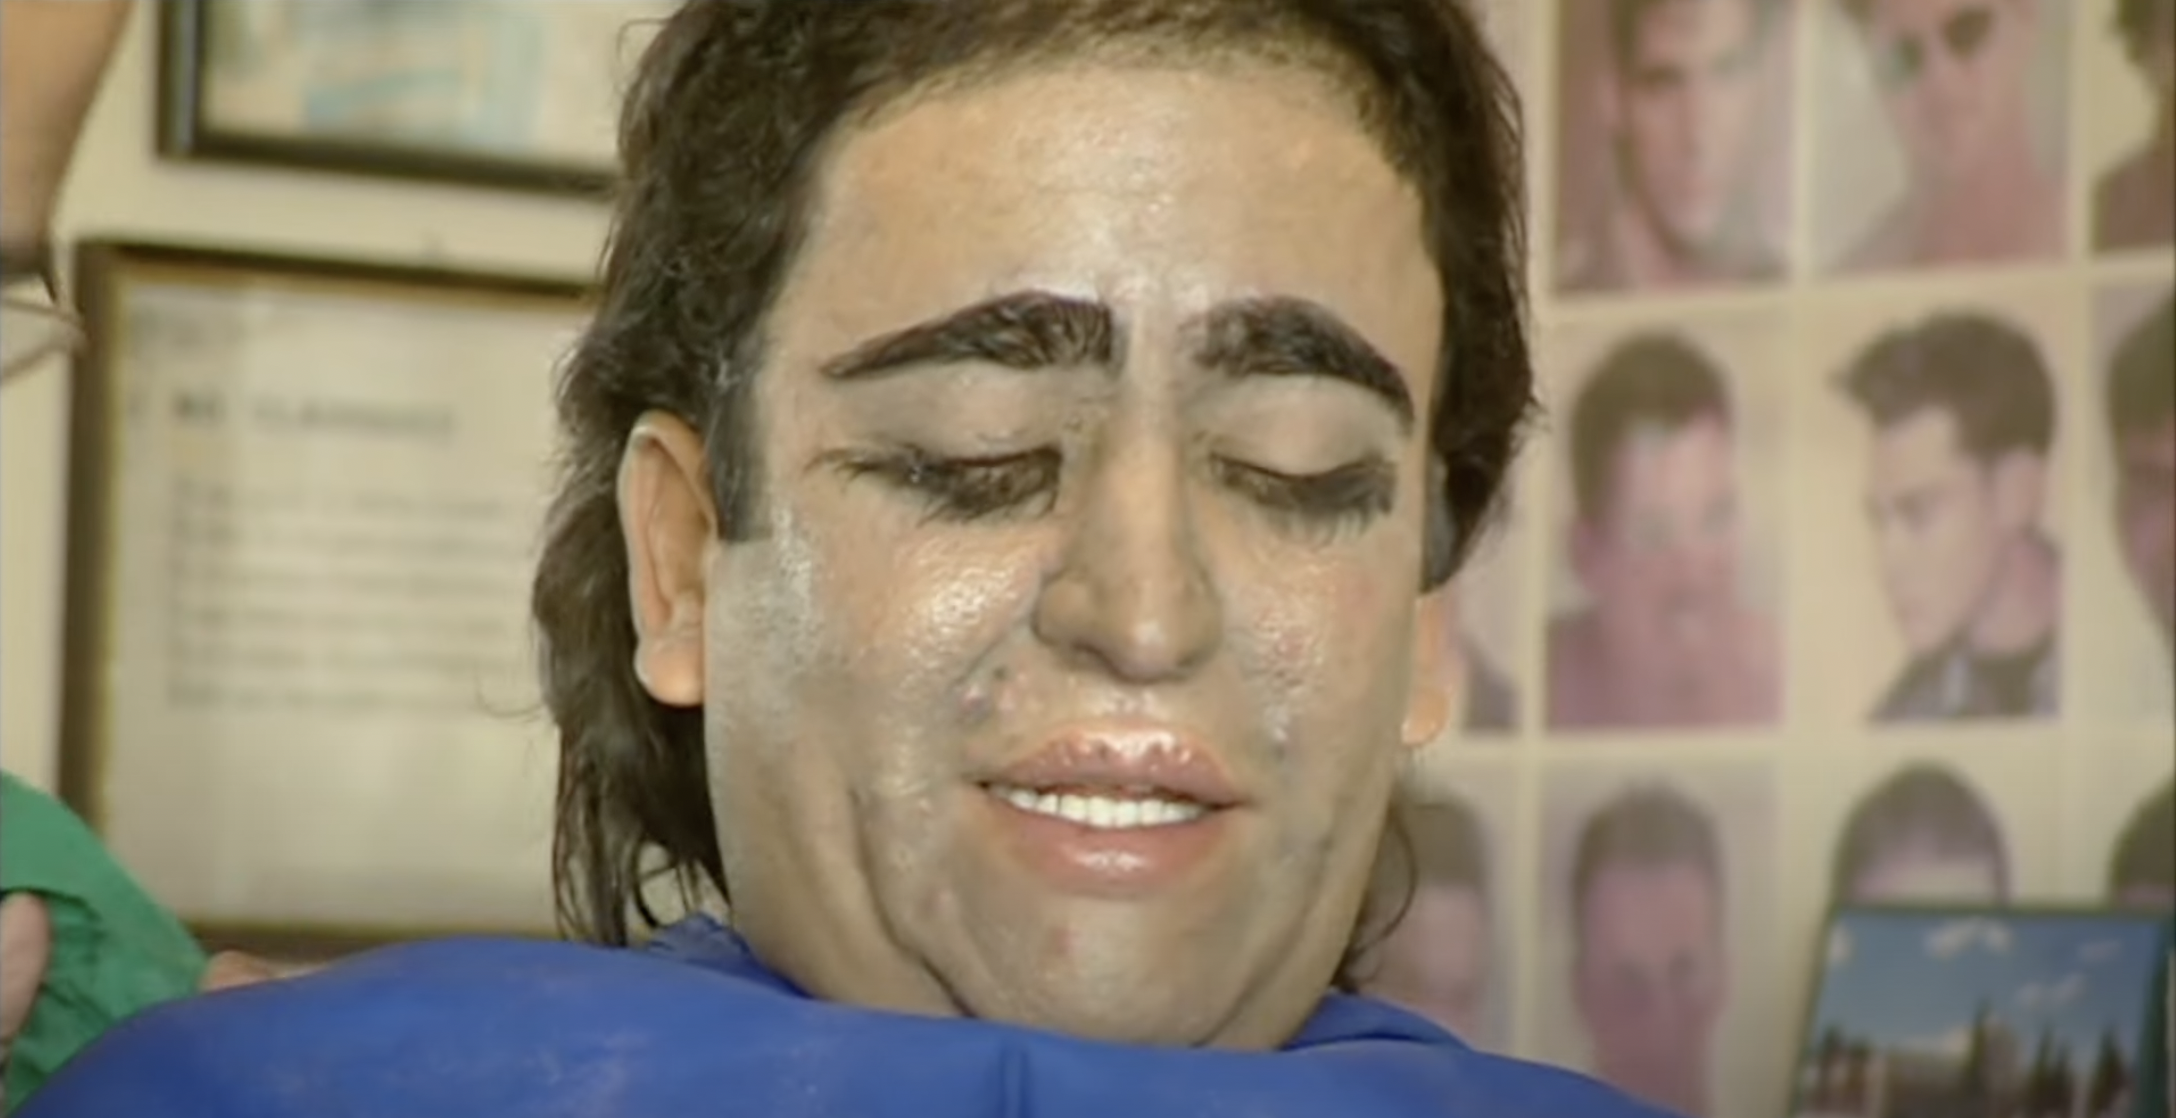 Jesus Aceves with his face shaved | Source: youtube.com/A True Story